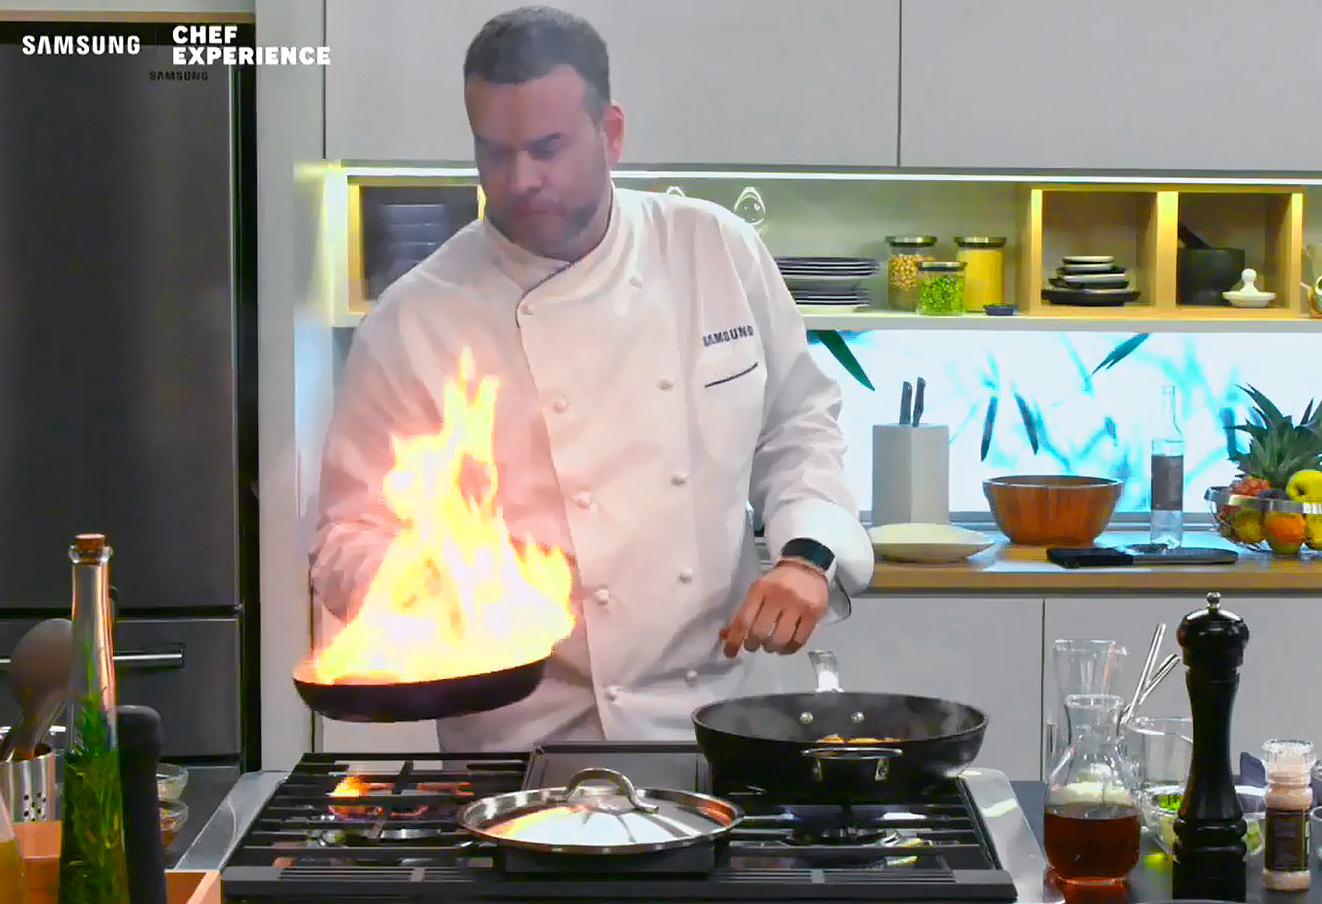 Samsung Chef Experience